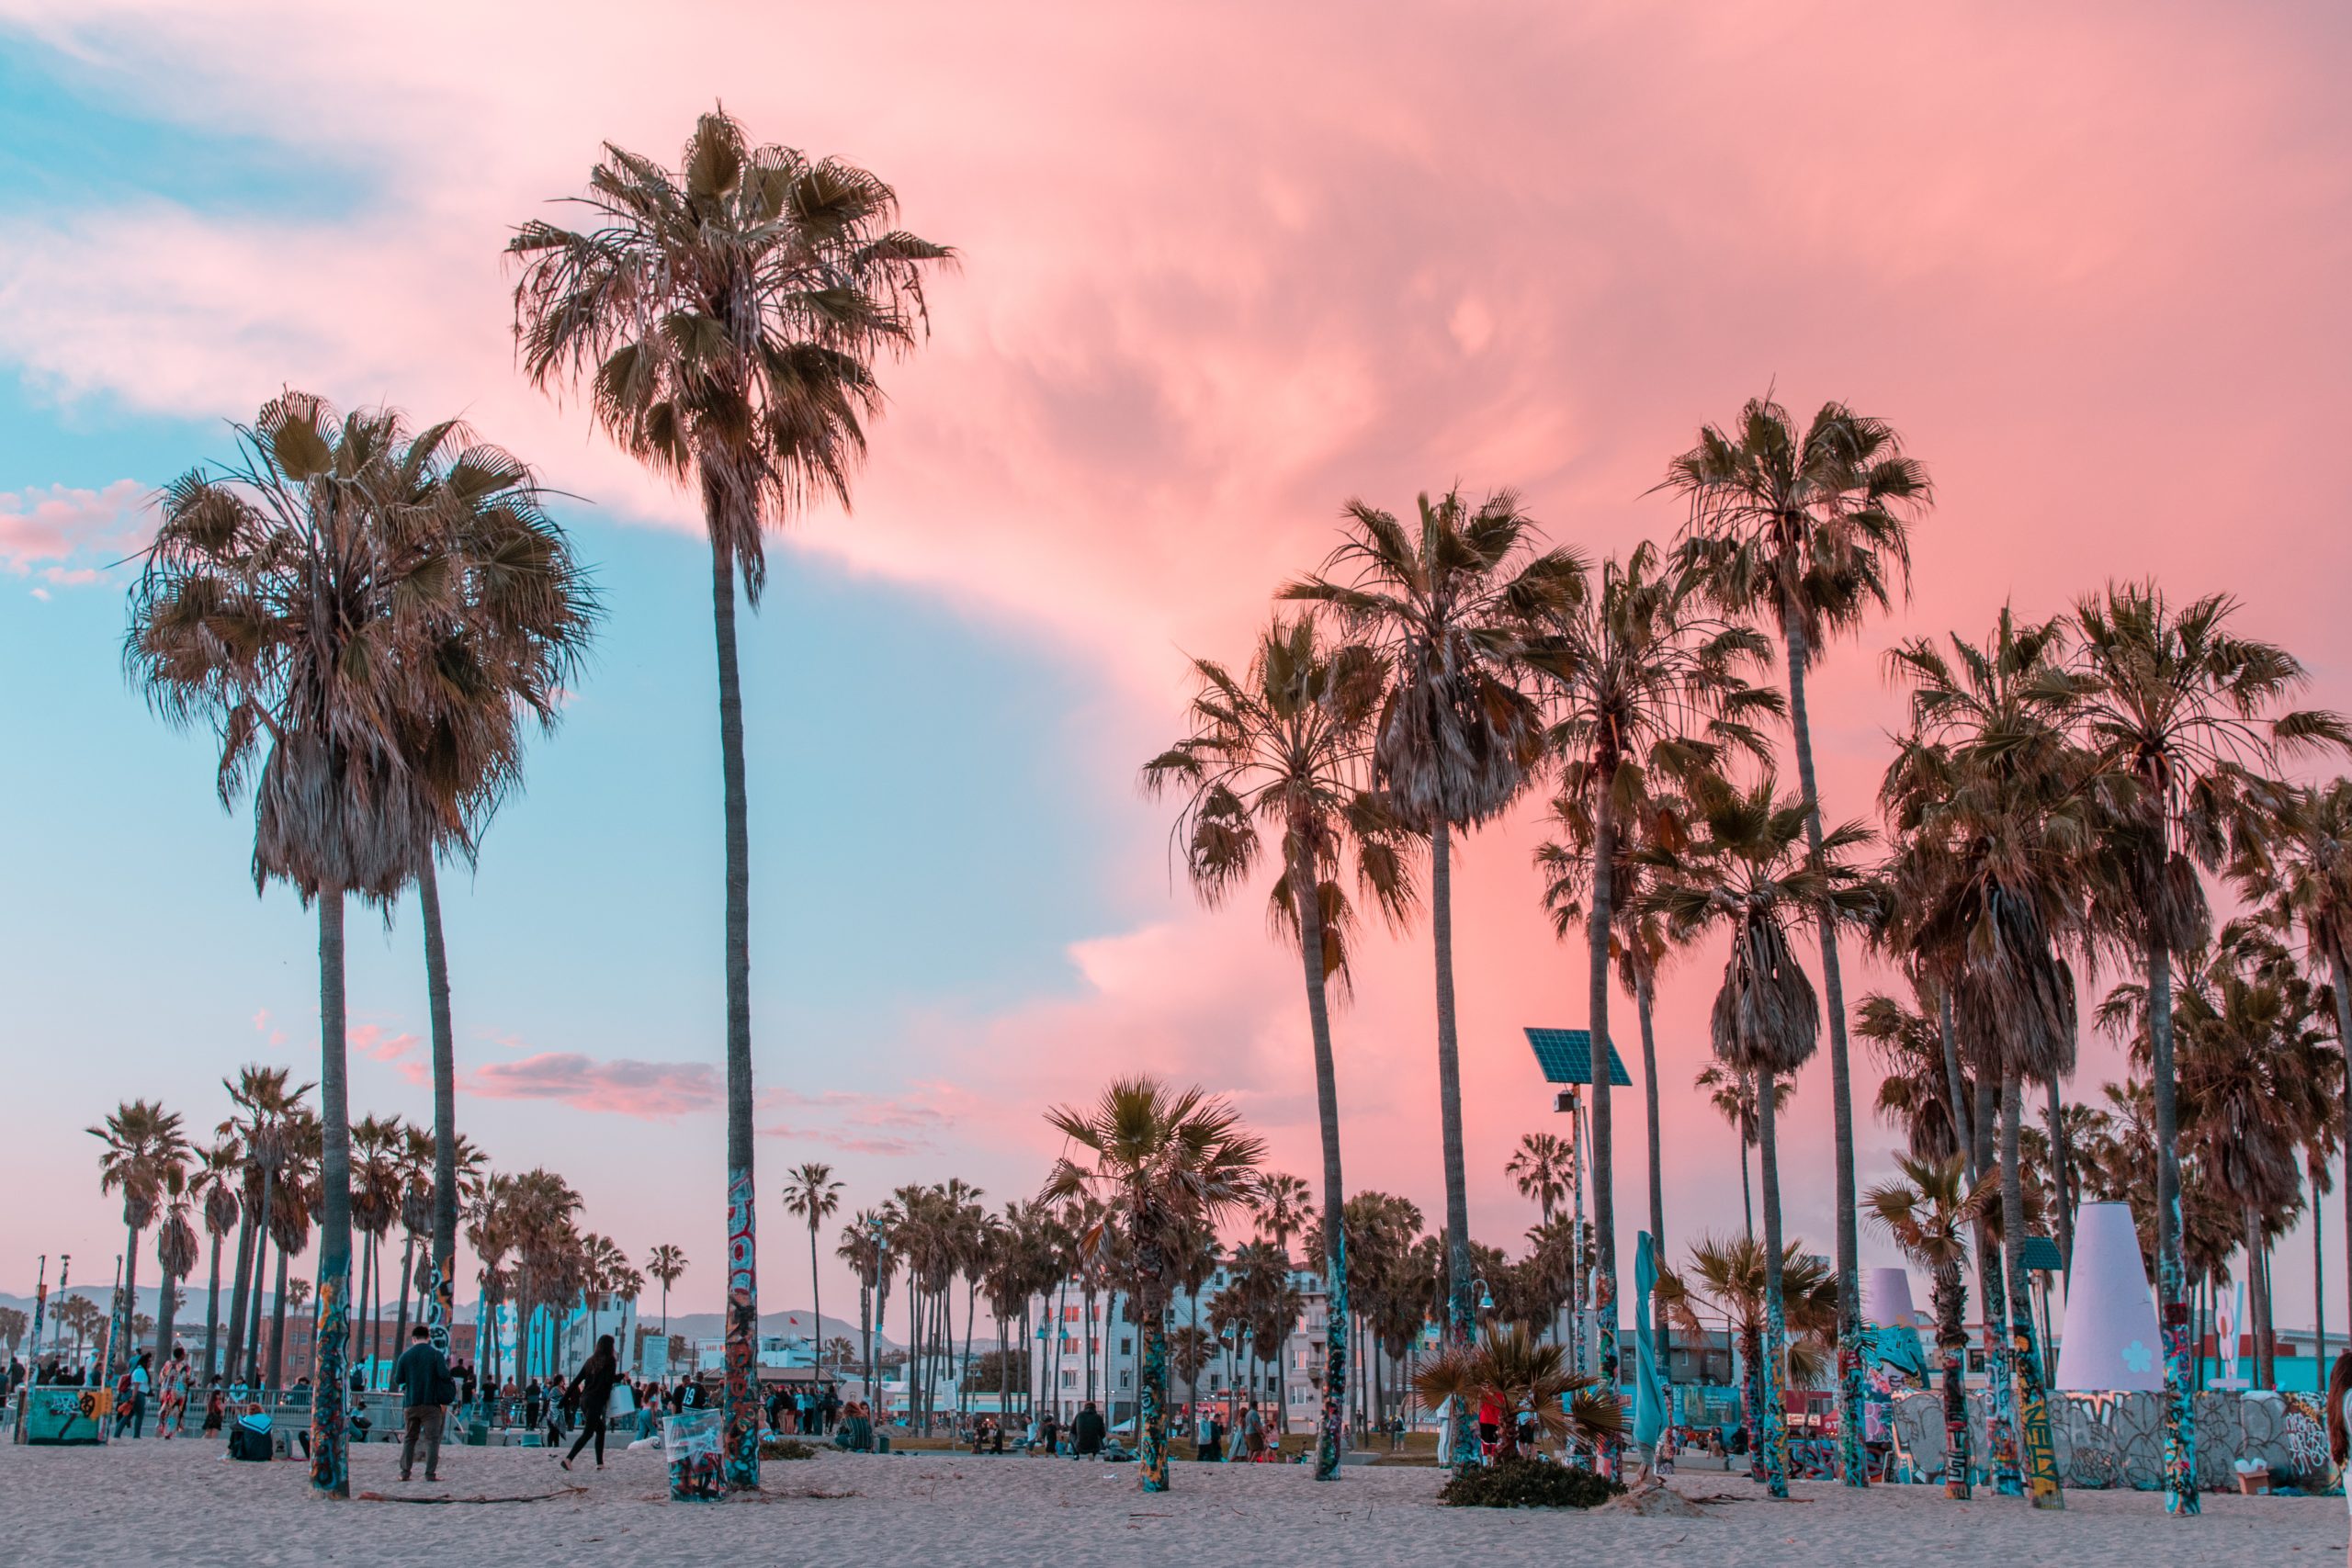 Venice Beach in Los Angeles, California with tall palm trees and pink clouds on the blue sky.